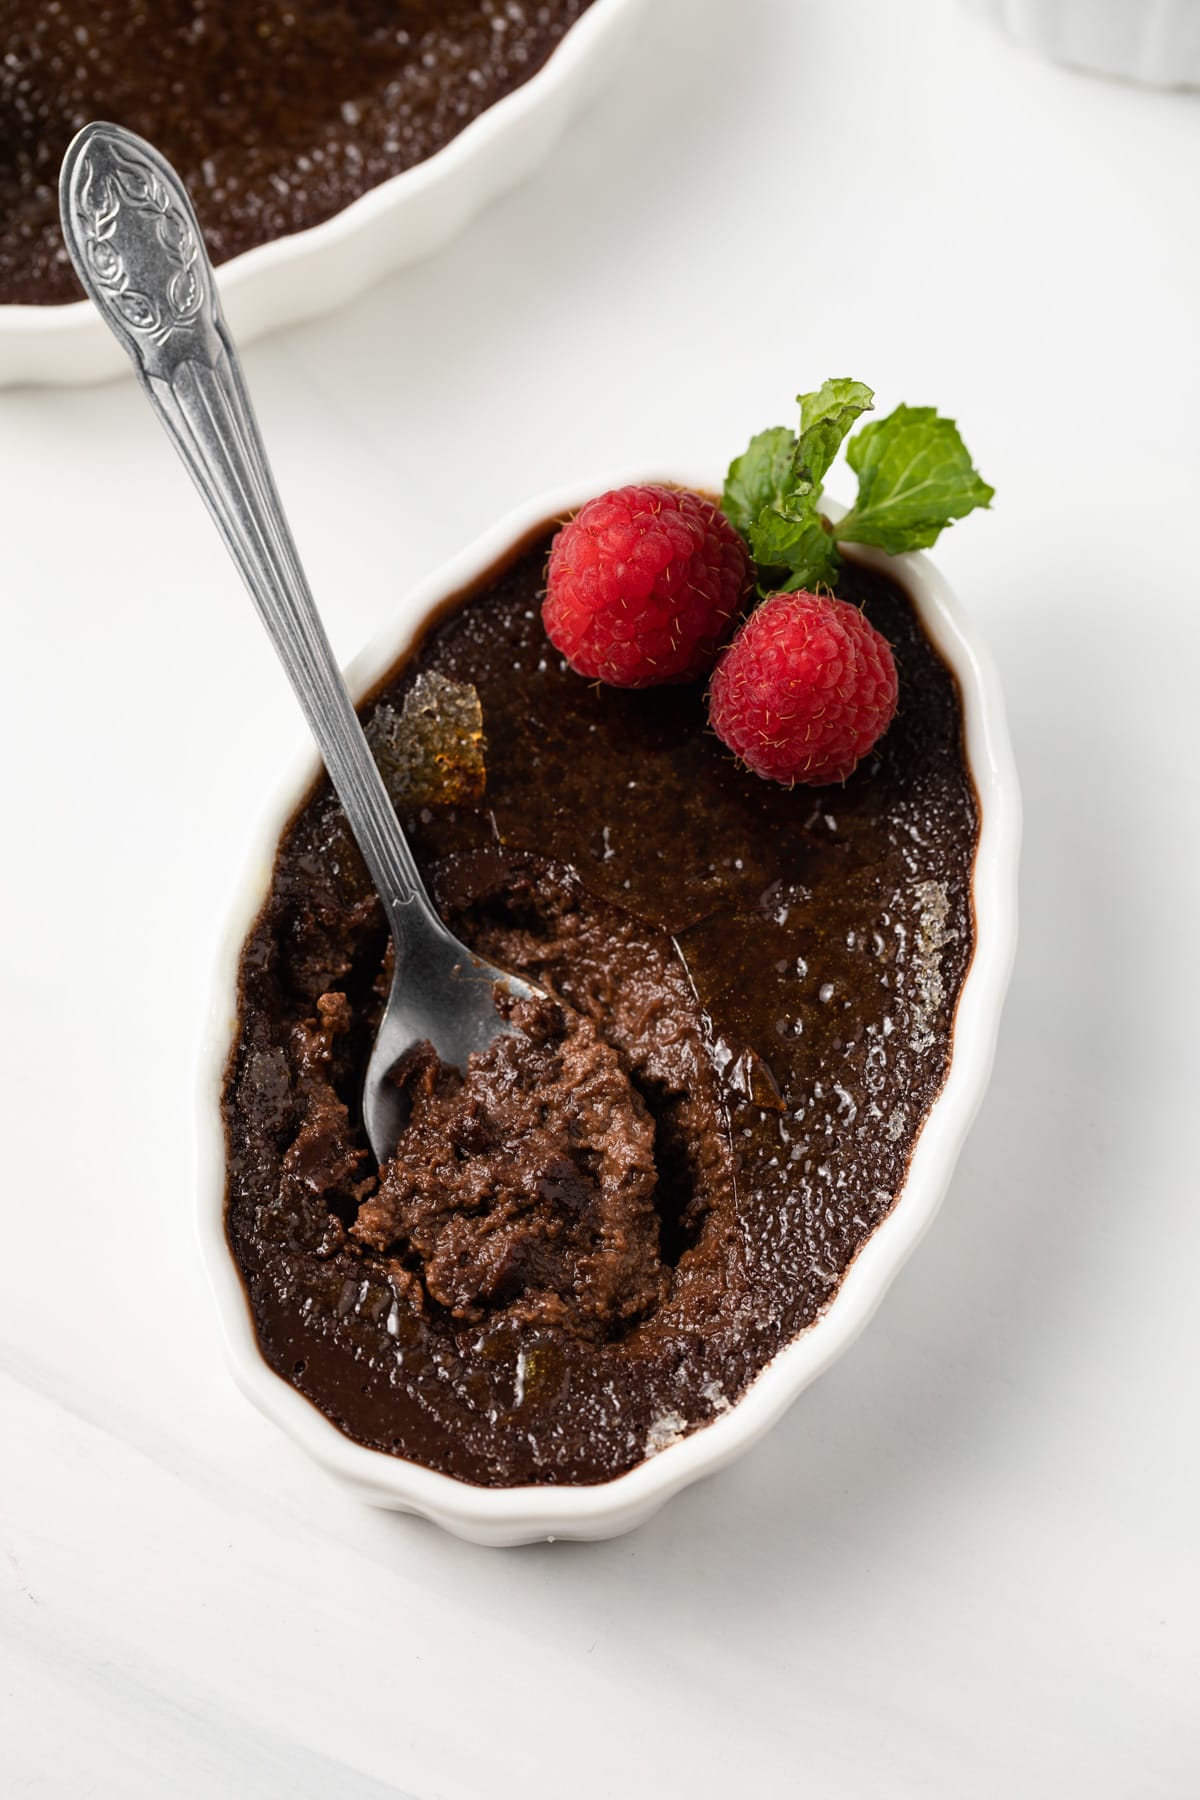 Spoon in chocolate creme brulee.